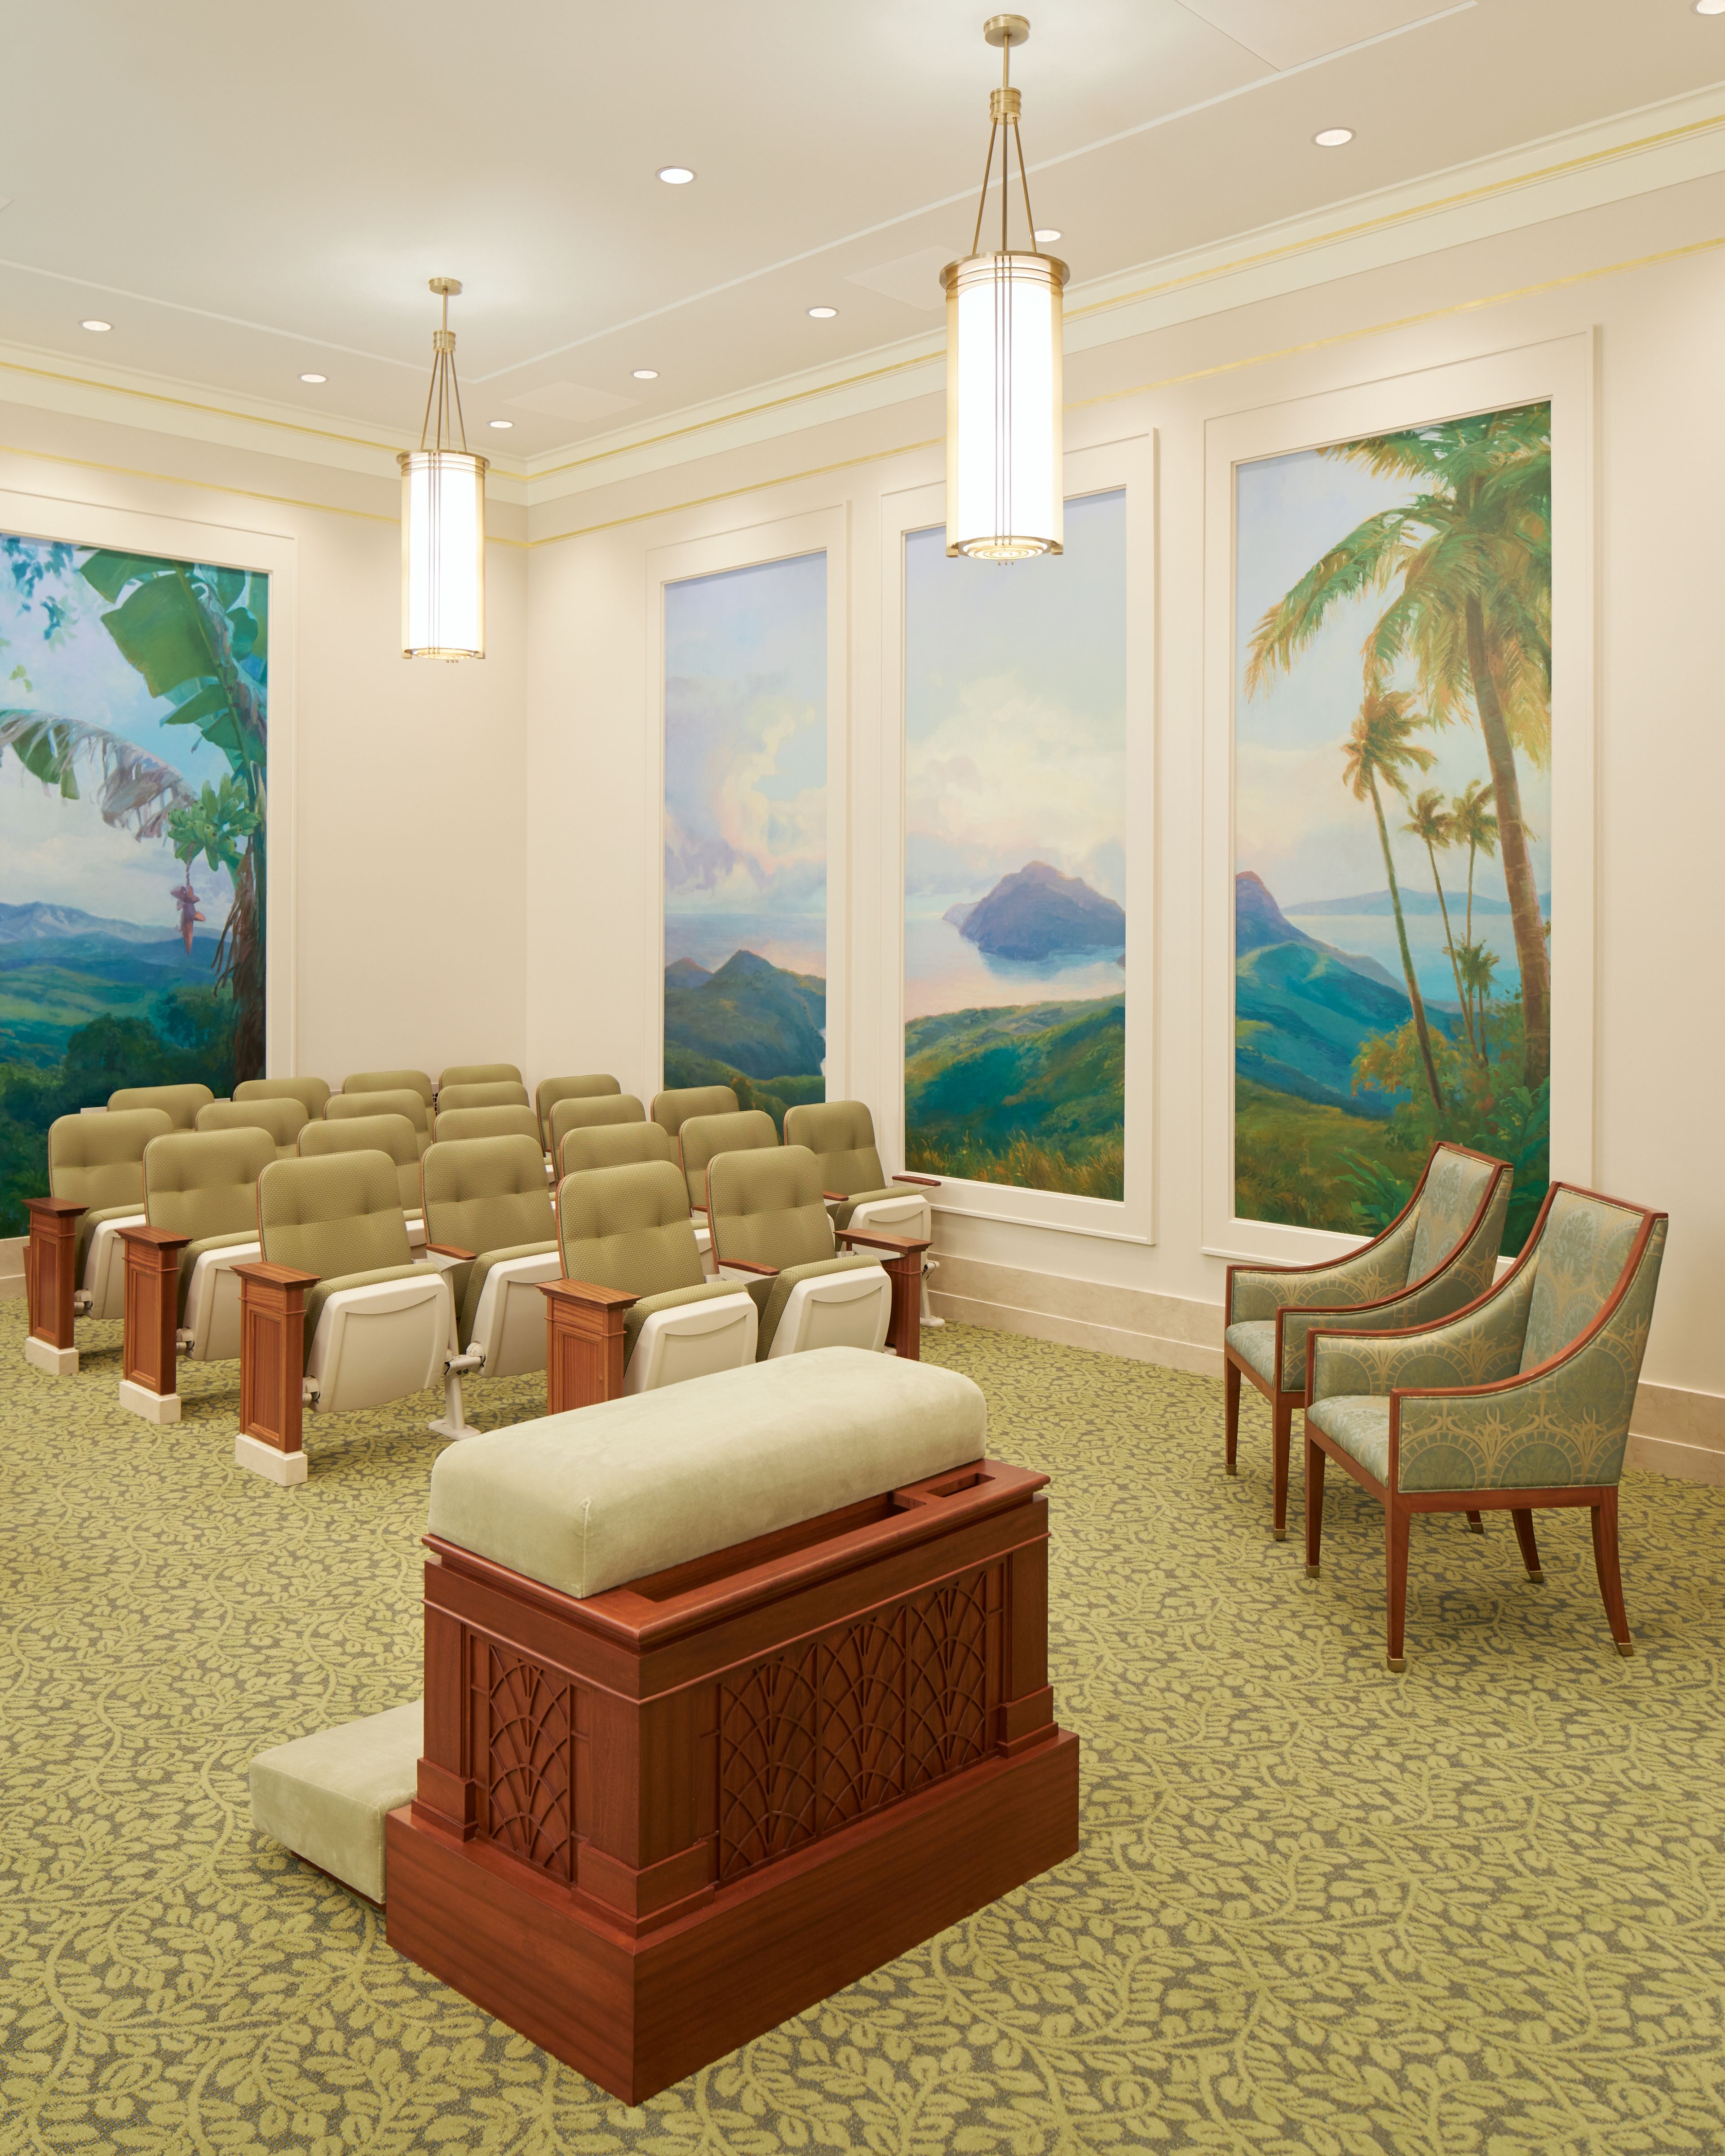 An instruction room in the Port-au-Prince Haiti Temple.